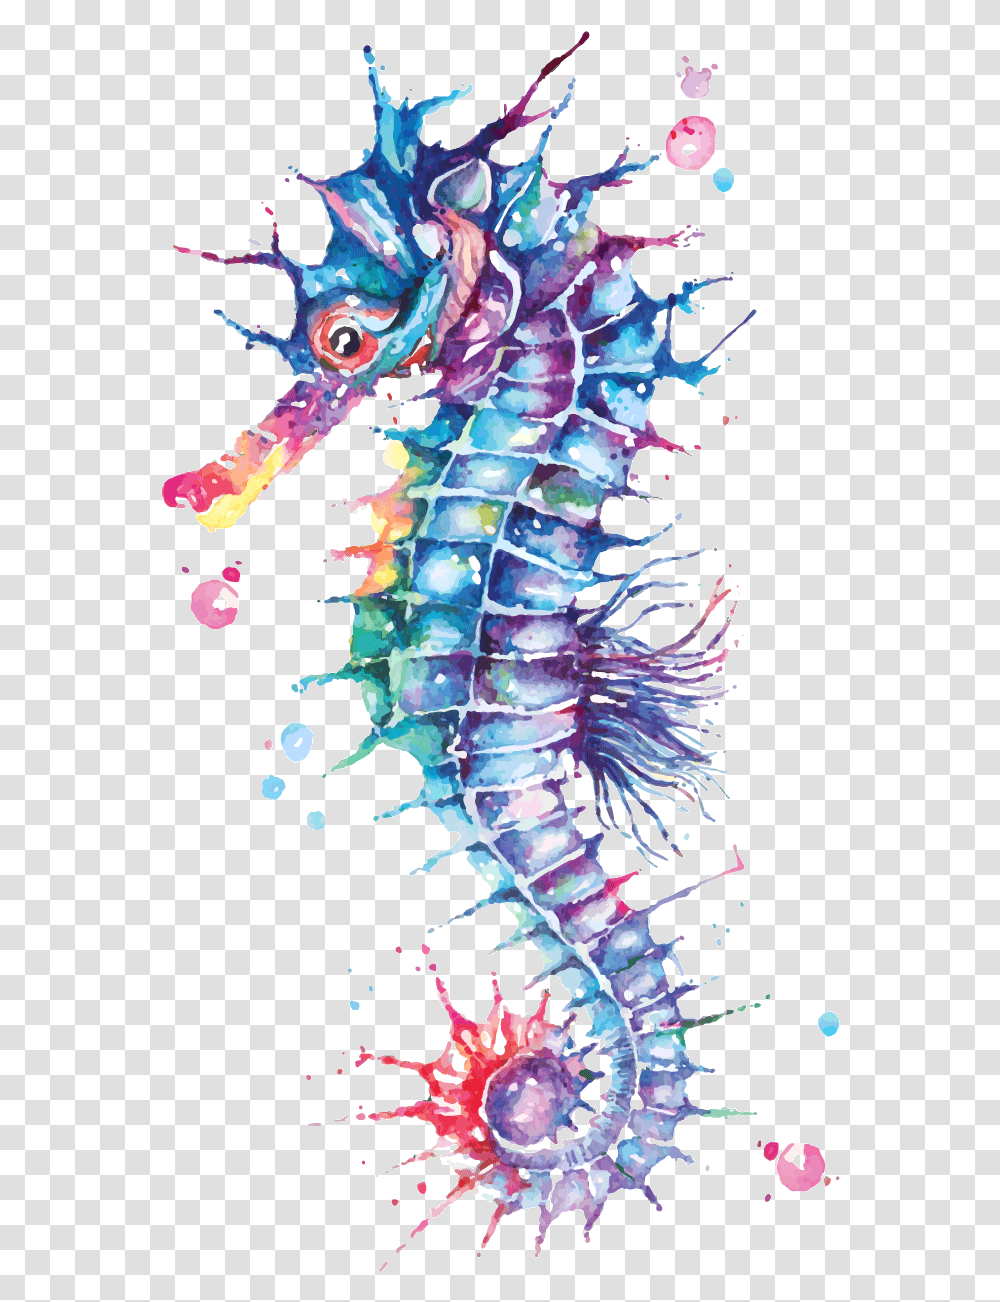 Seahorse Painted With Watercolor Download Free Vectors Watercolor Seahorse Painting, Sea Life, Animal, Mammal Transparent Png